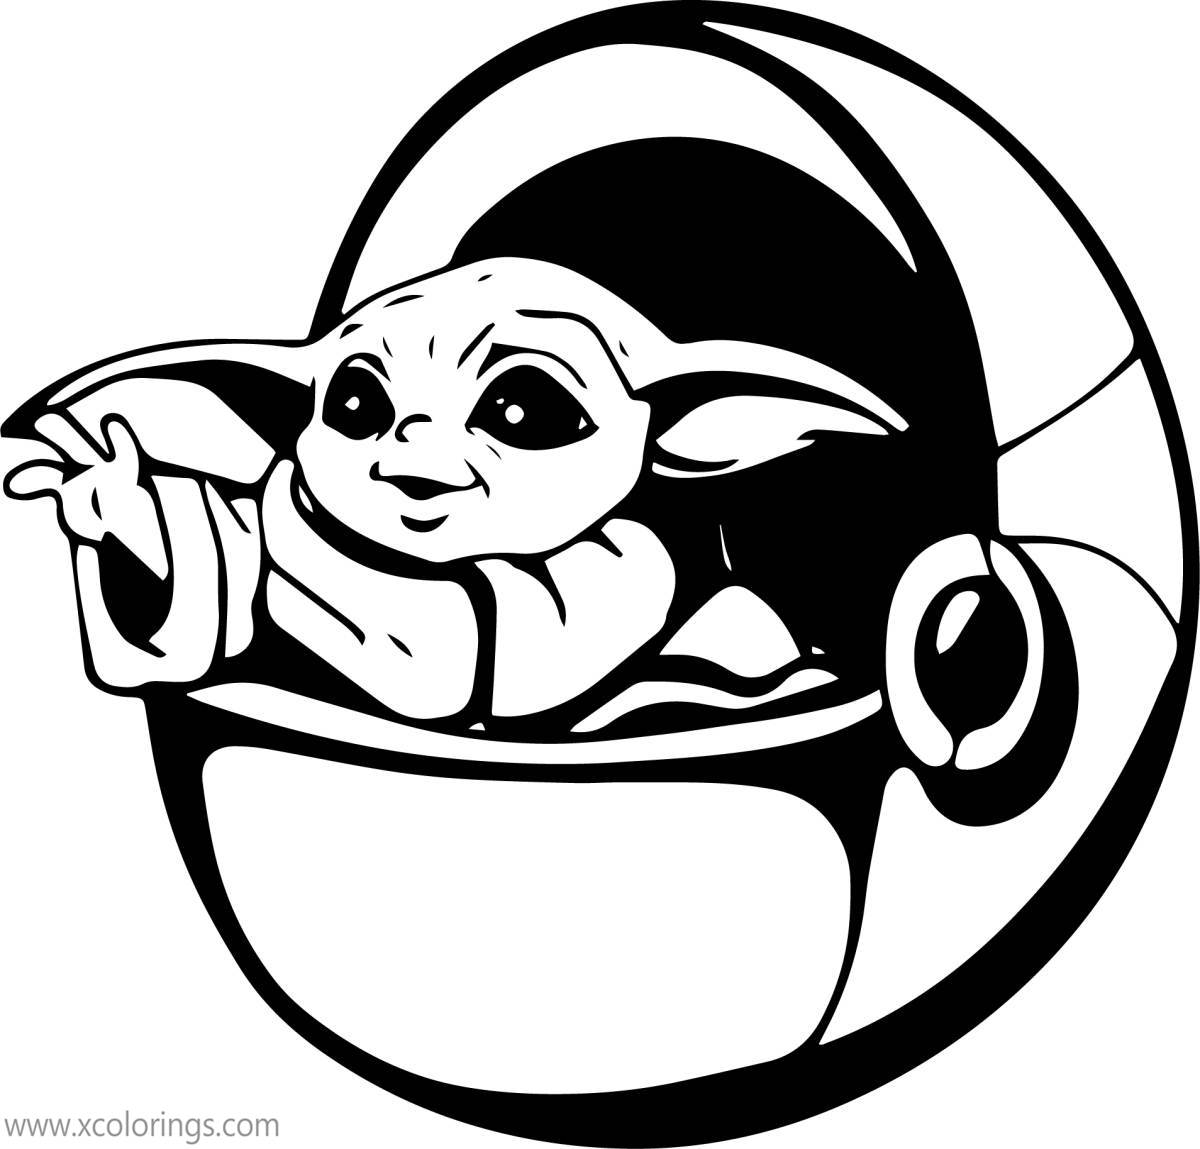 Free Baby Yoda In Cradle Coloring Pages printable